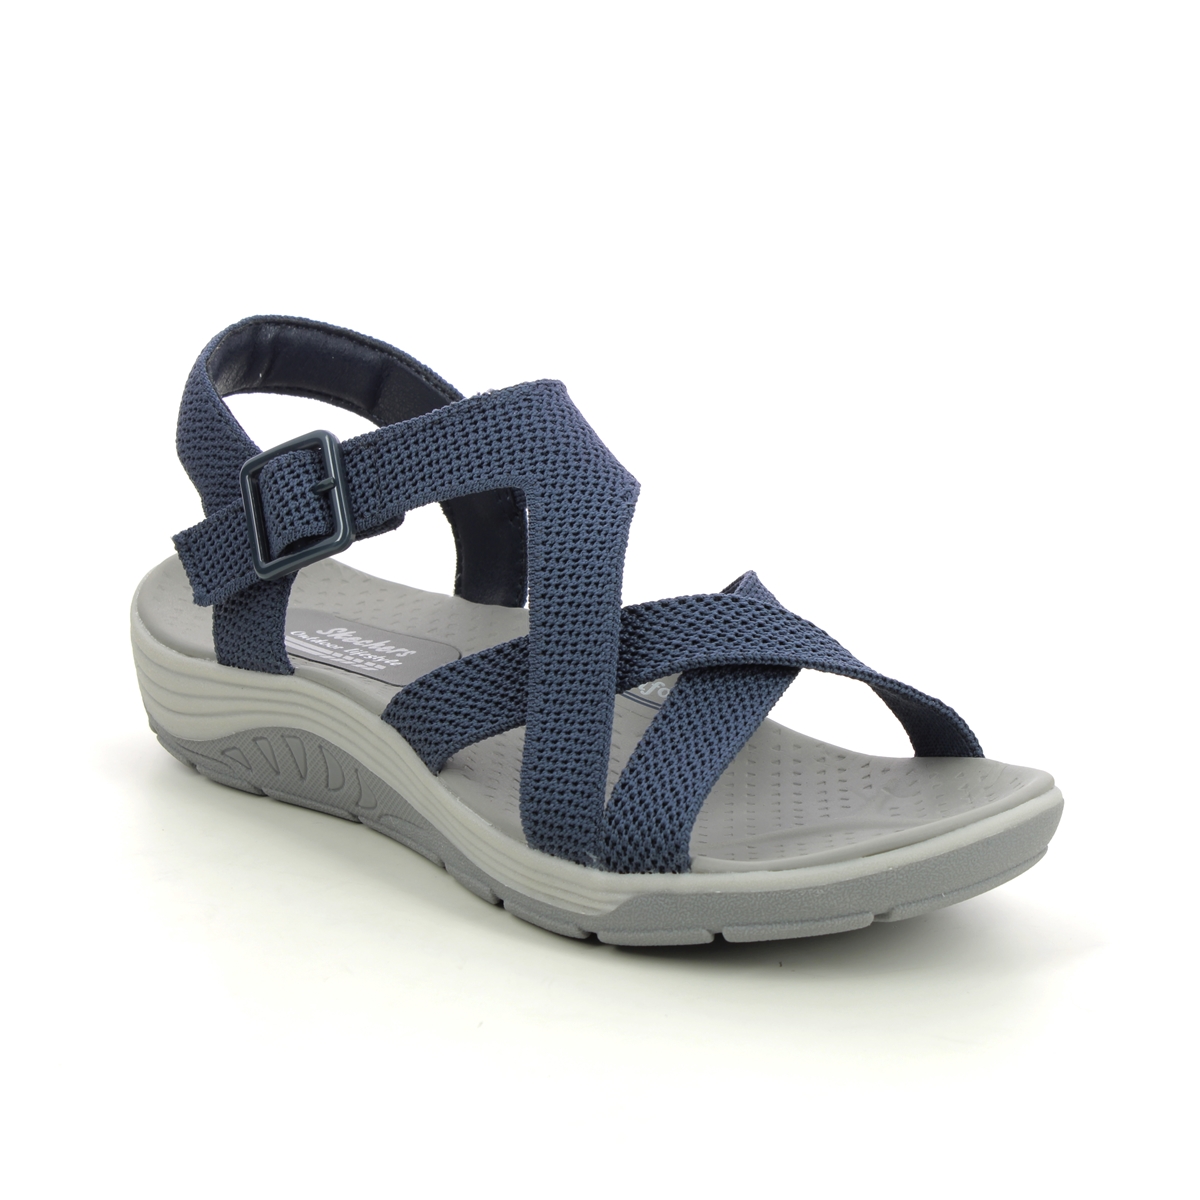 Skechers Reggae Cup NVY Navy Womens Comfortable Sandals 163198 in a Plain Textile in Size 6